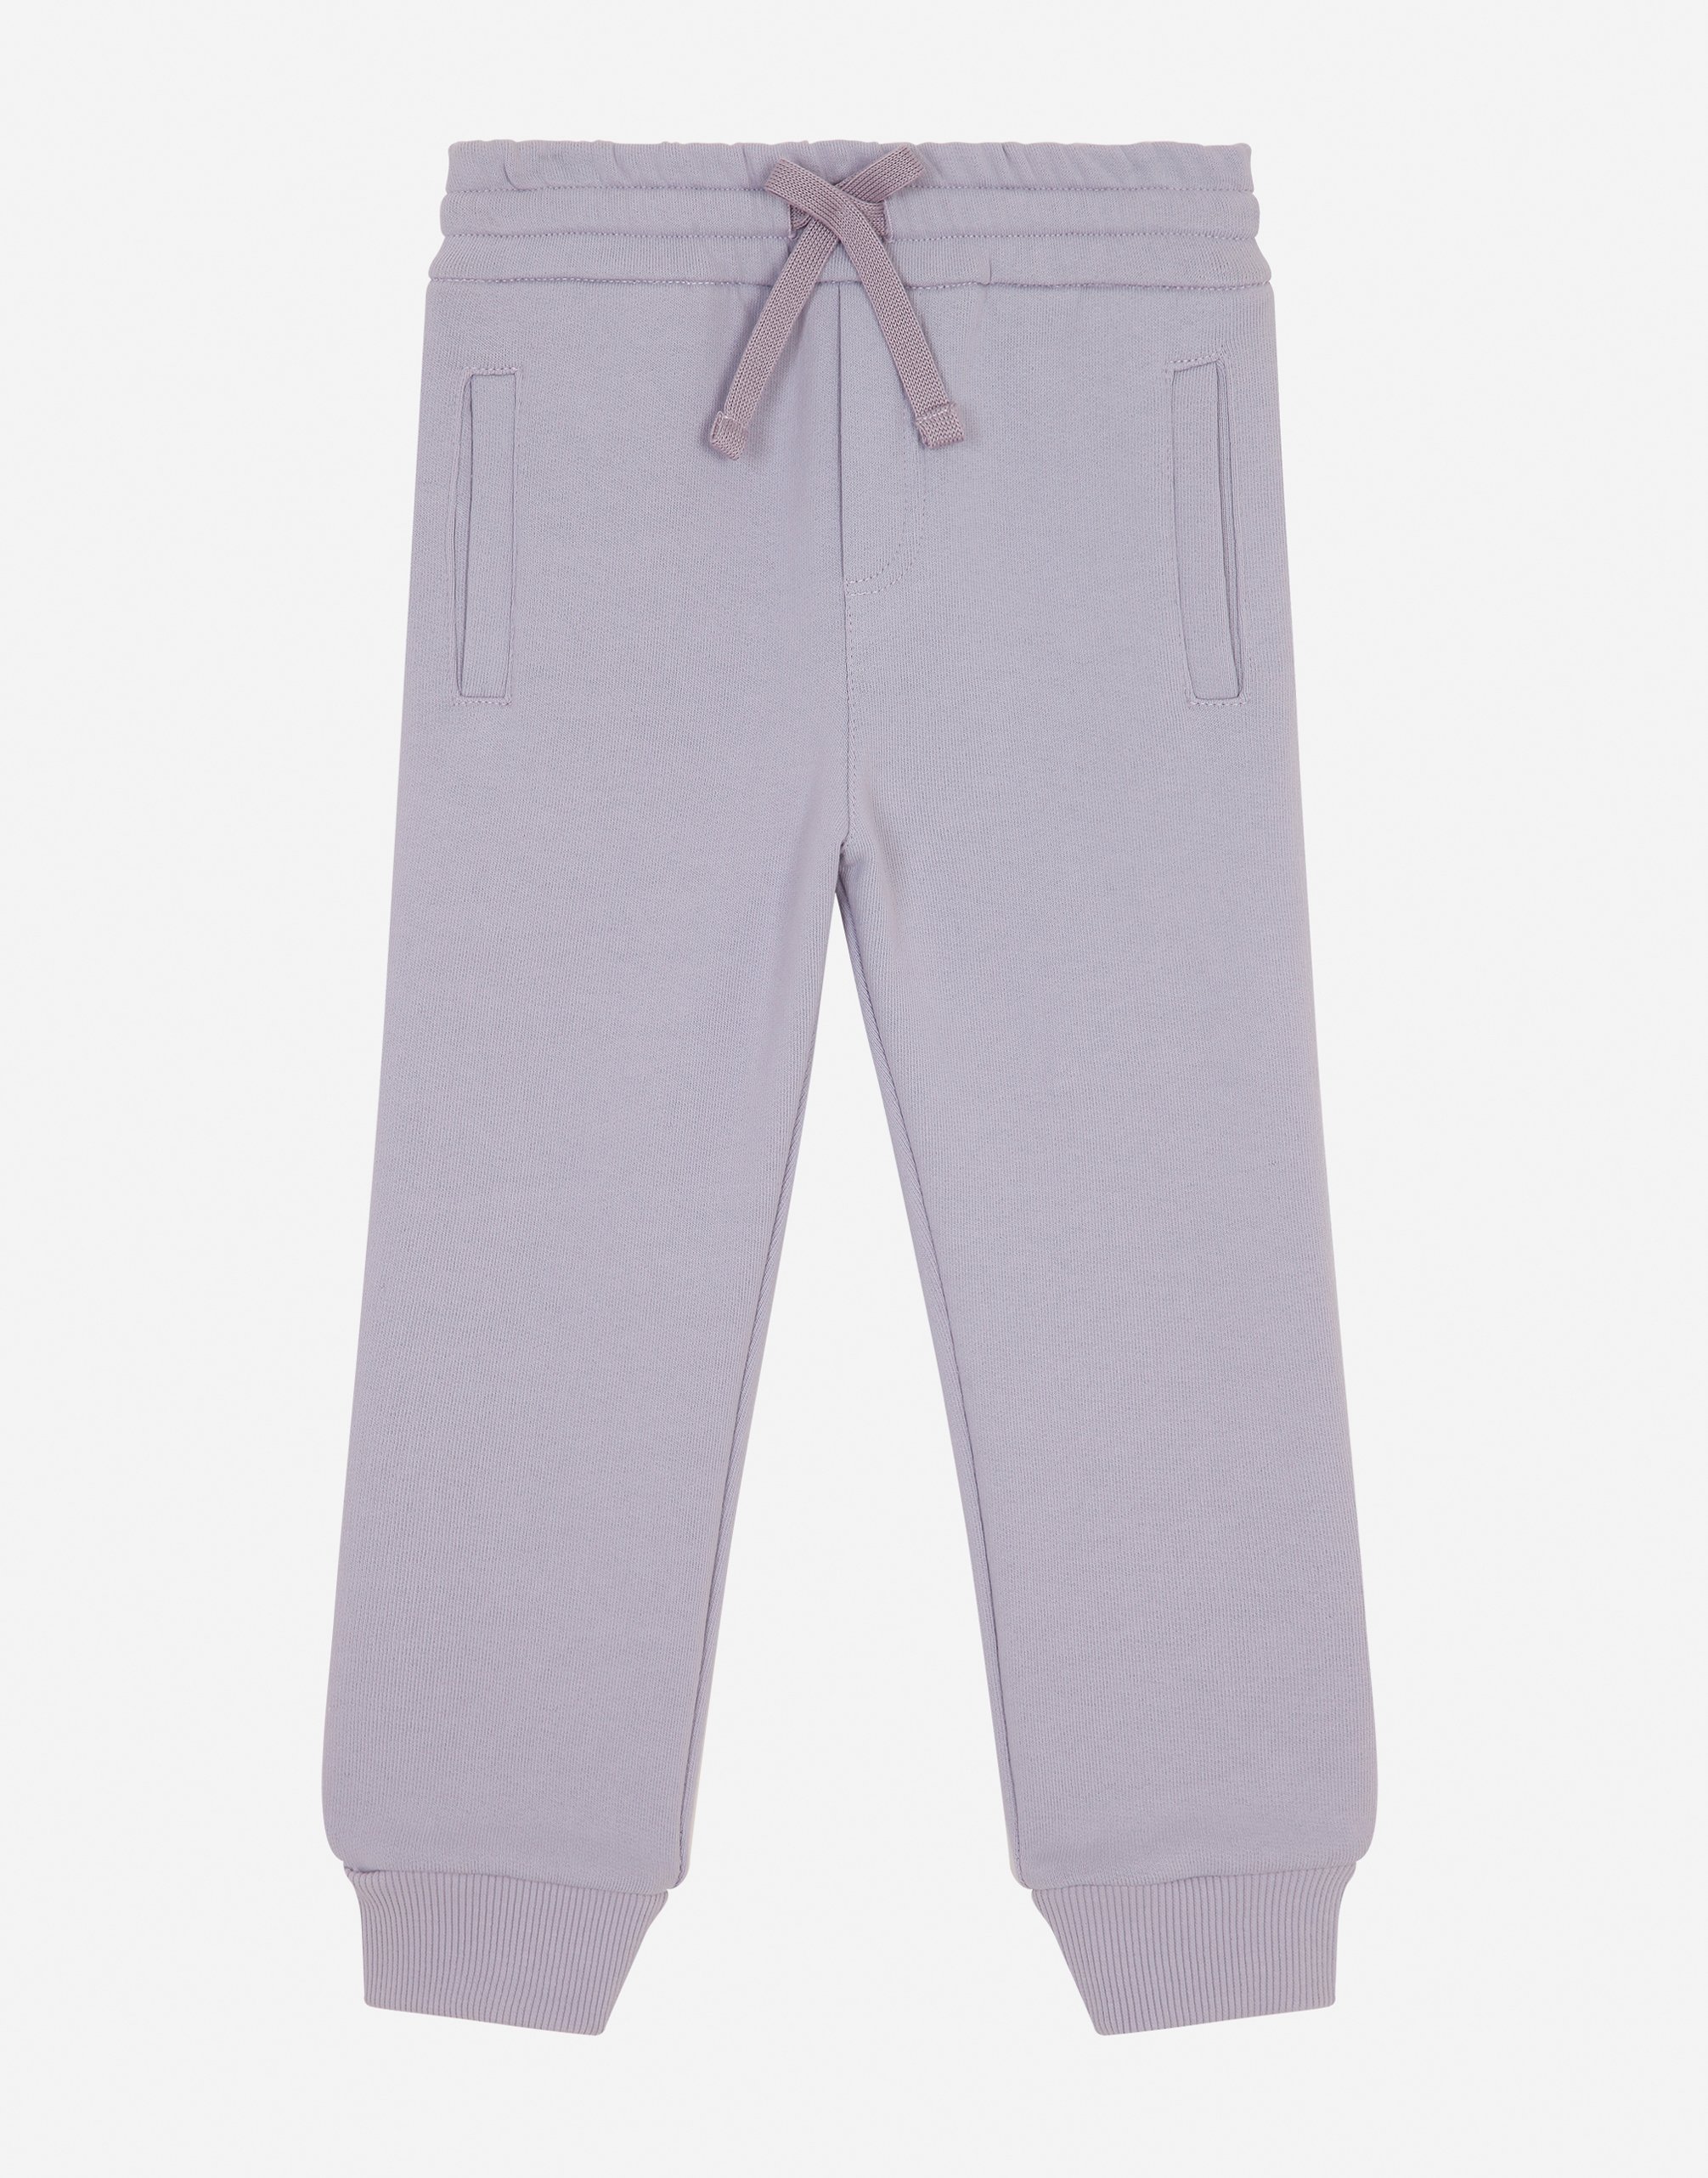 Jersey jogging pants with logo tag in Wisteria